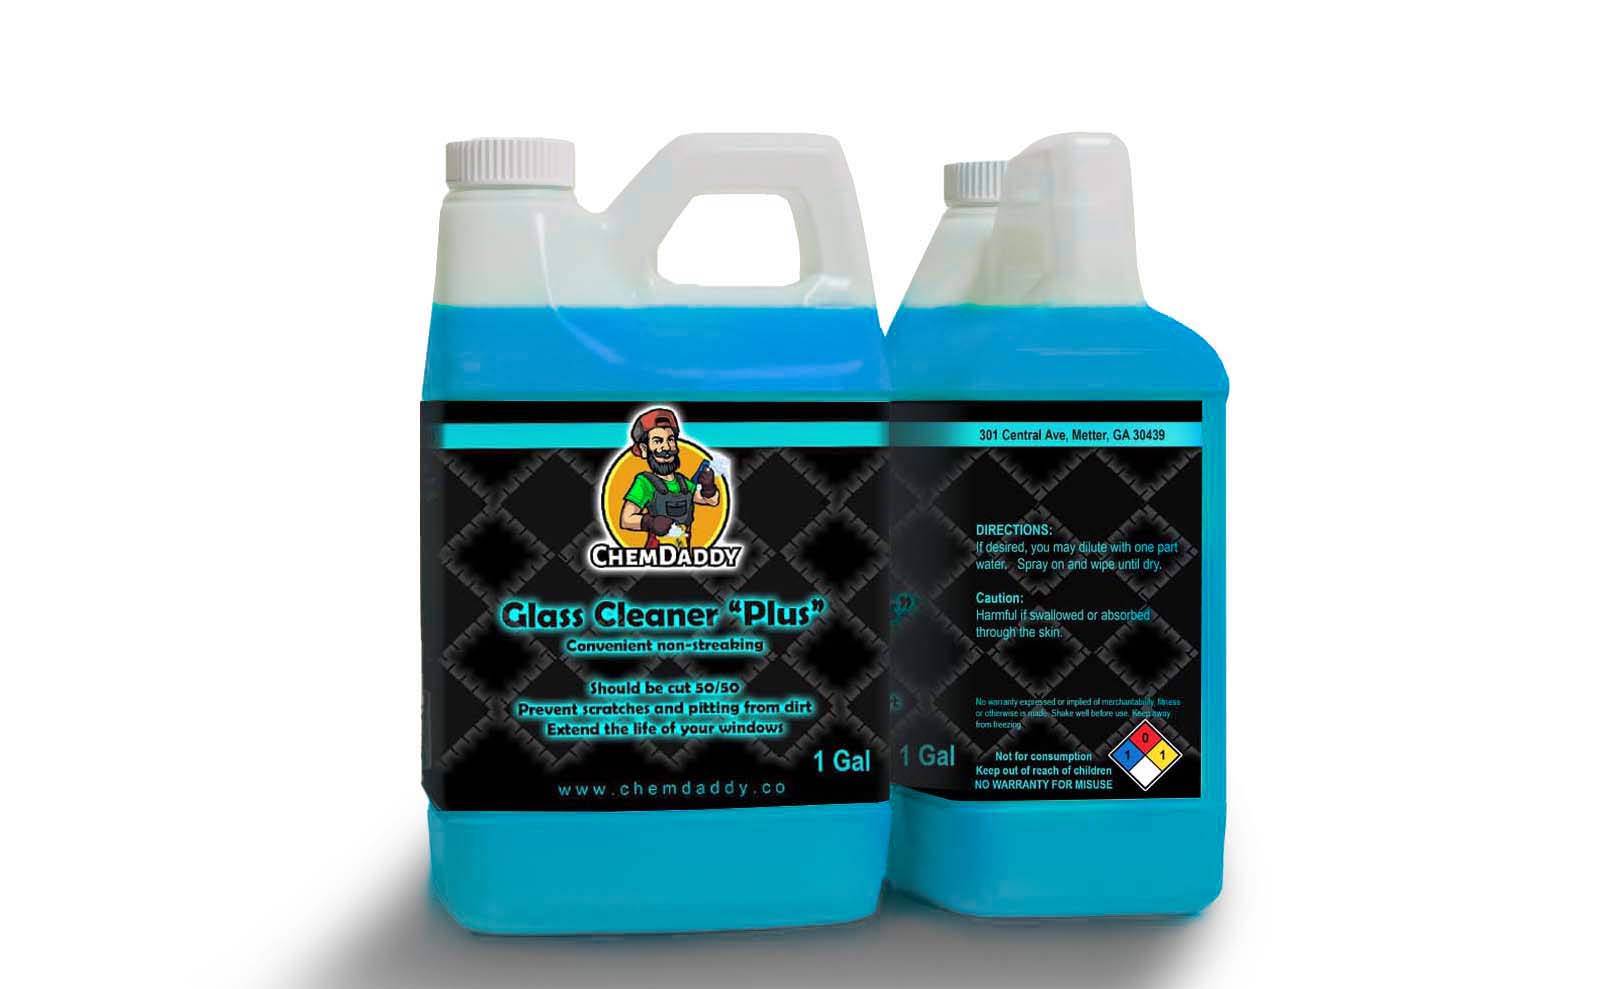 Glass Cleaner "Plus"™ - Streak-Free Concentrate by ChemDaddy - ChemDaddy -